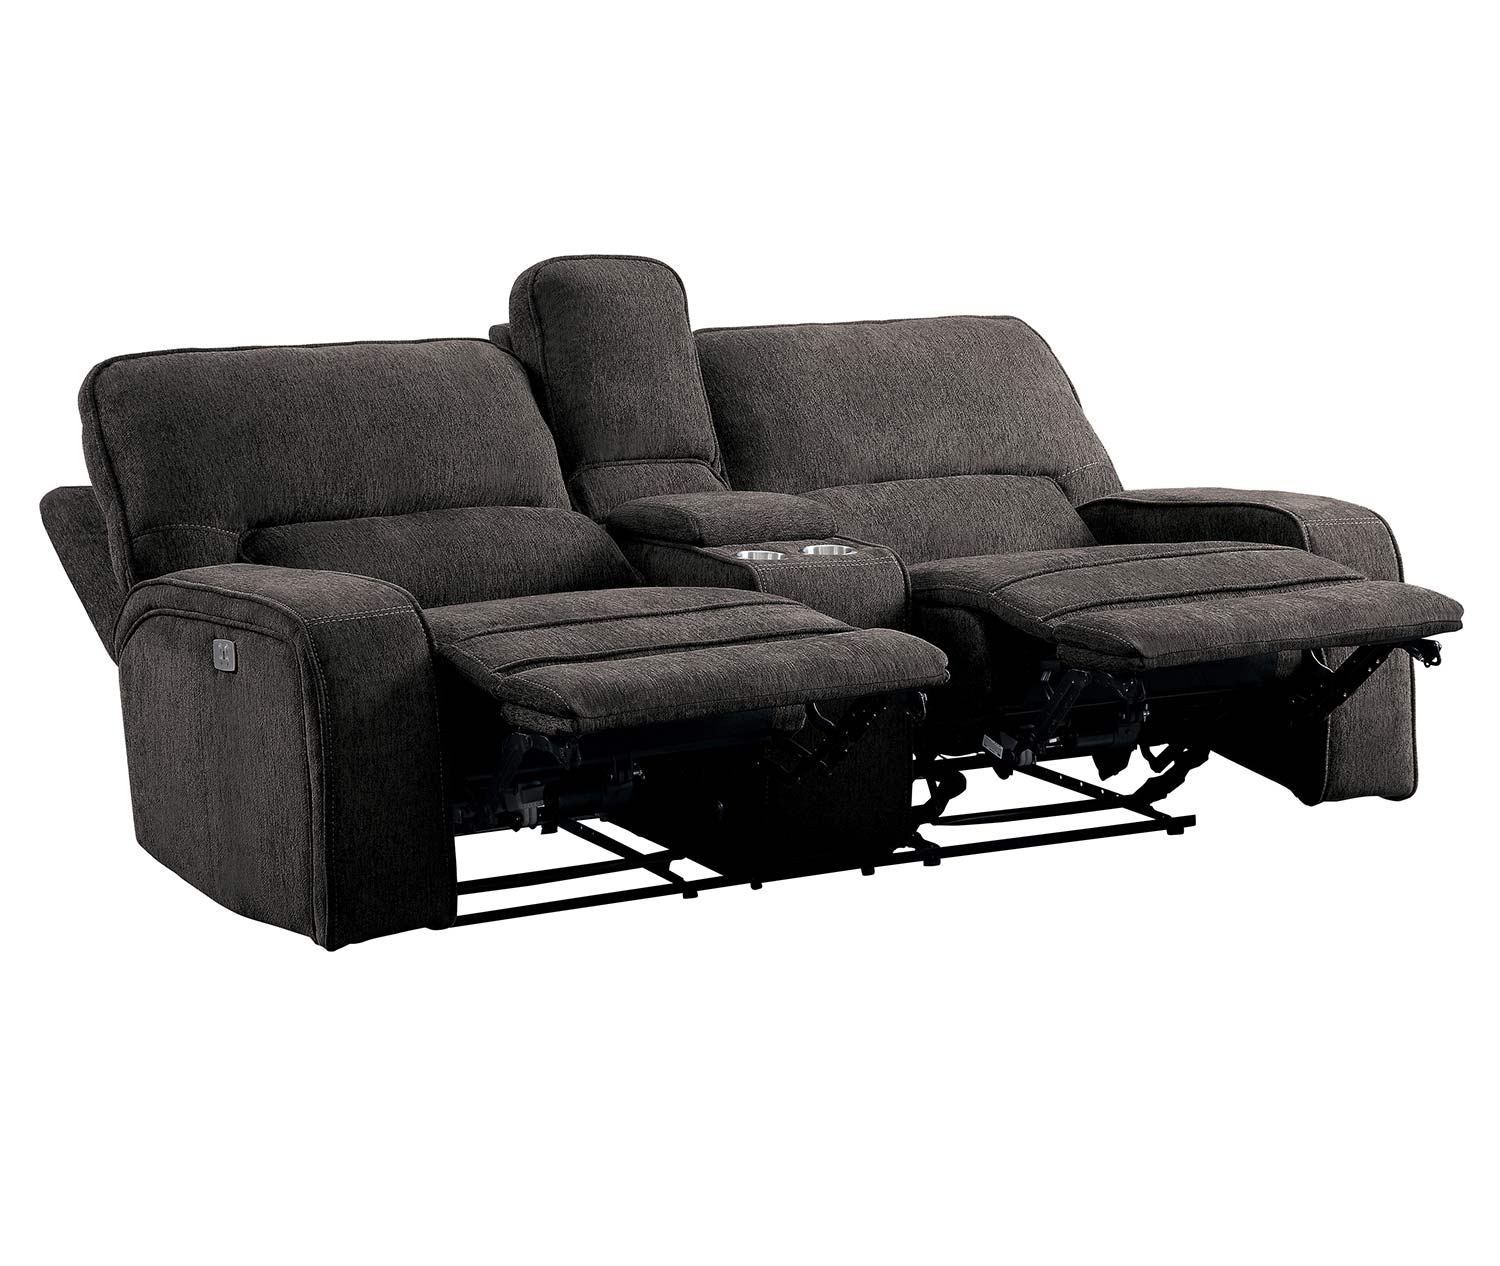 Homelegance Borneo Double Reclining Love Seat with Center Console - Chocolate